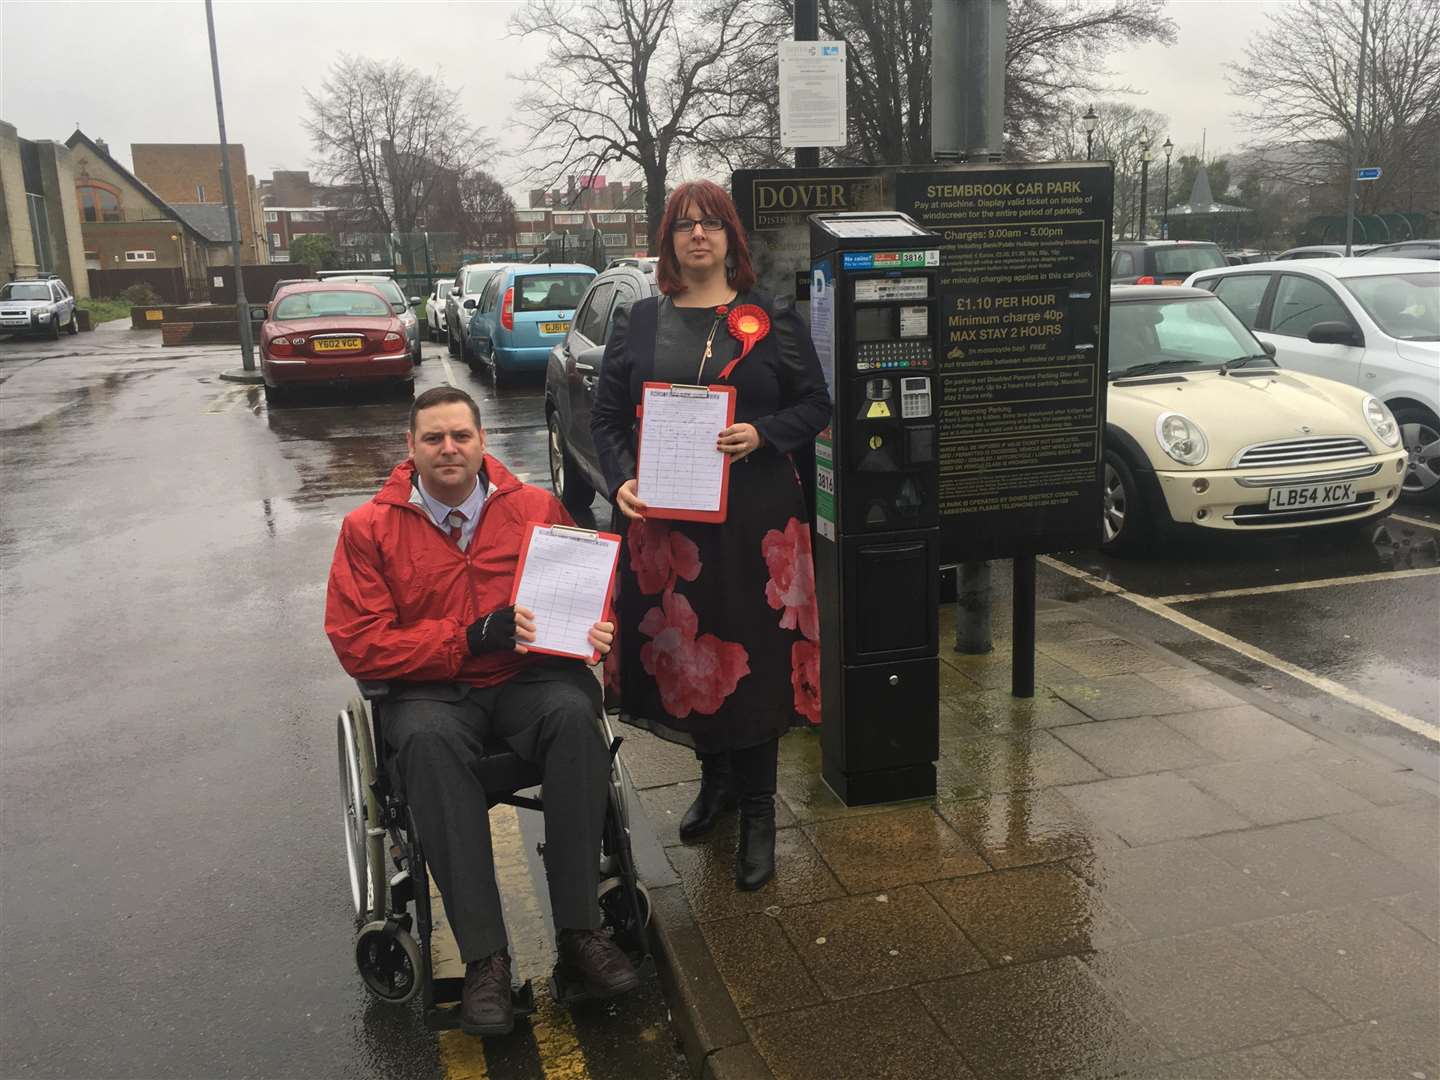 Cllr Charllie Zosseder, who put forward the motion, with colleague Ian Palmer at Stembrook car park. (1072558)